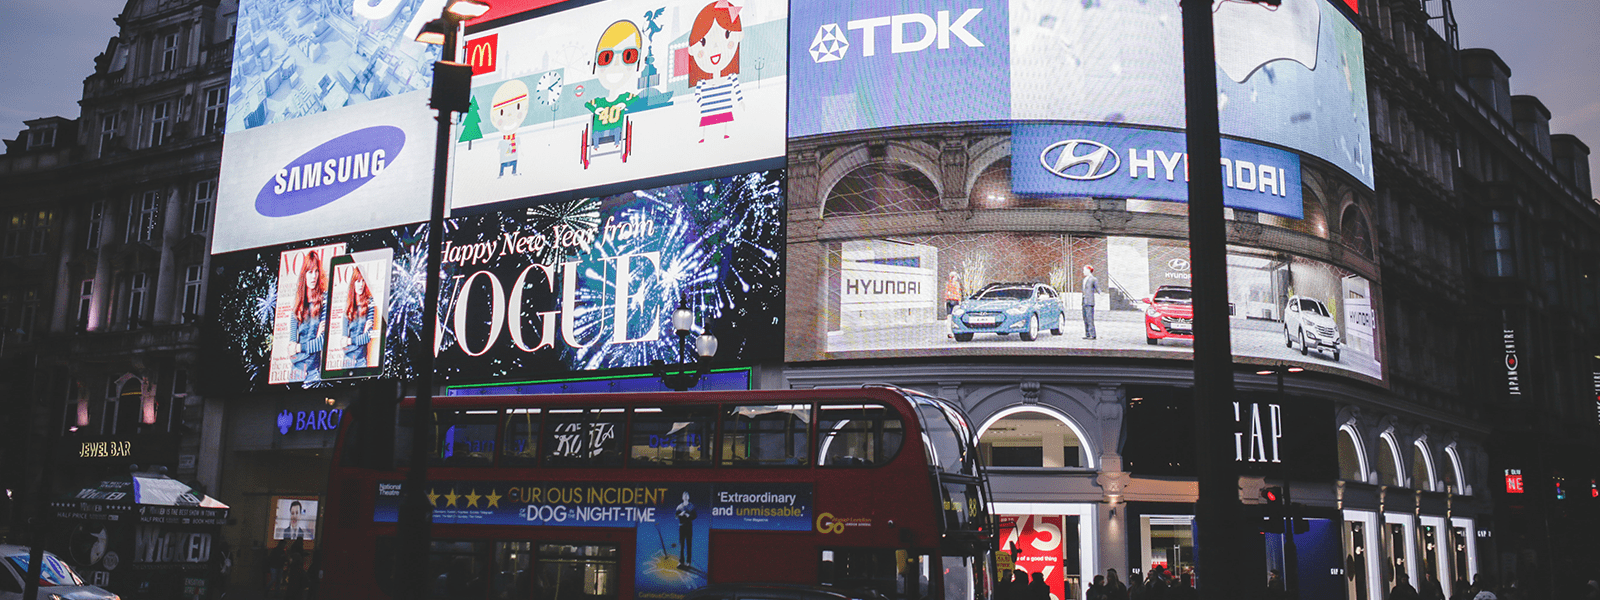 A city scene with advertising screens and buss ads